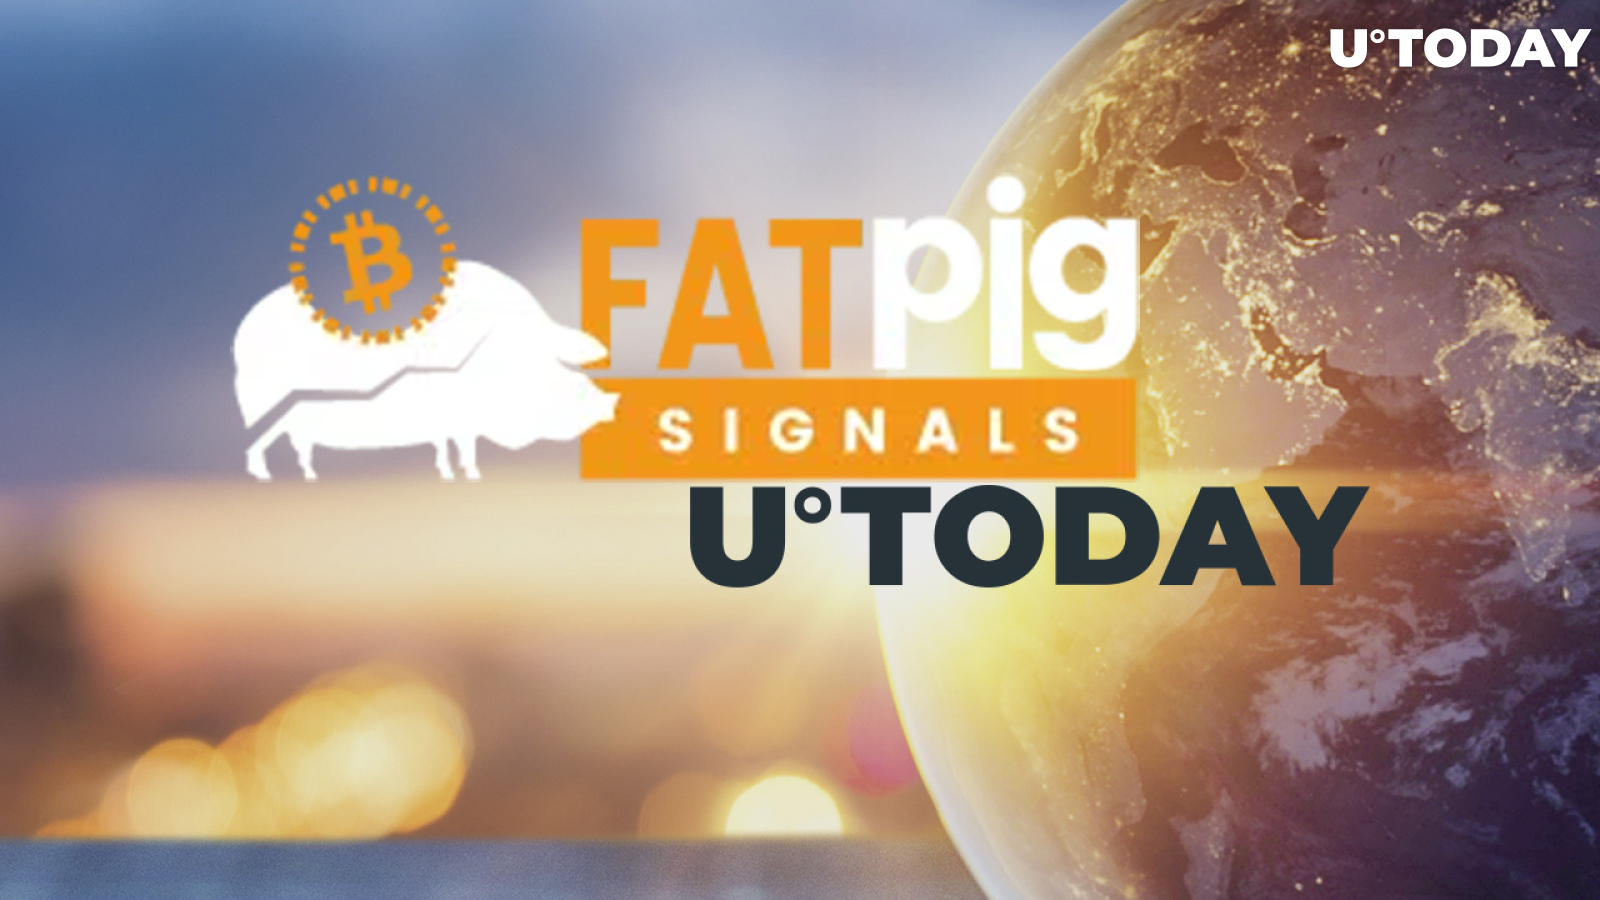 Fat Pig Signals Service Starts Broadcasting U.Today Content in Newsfeed